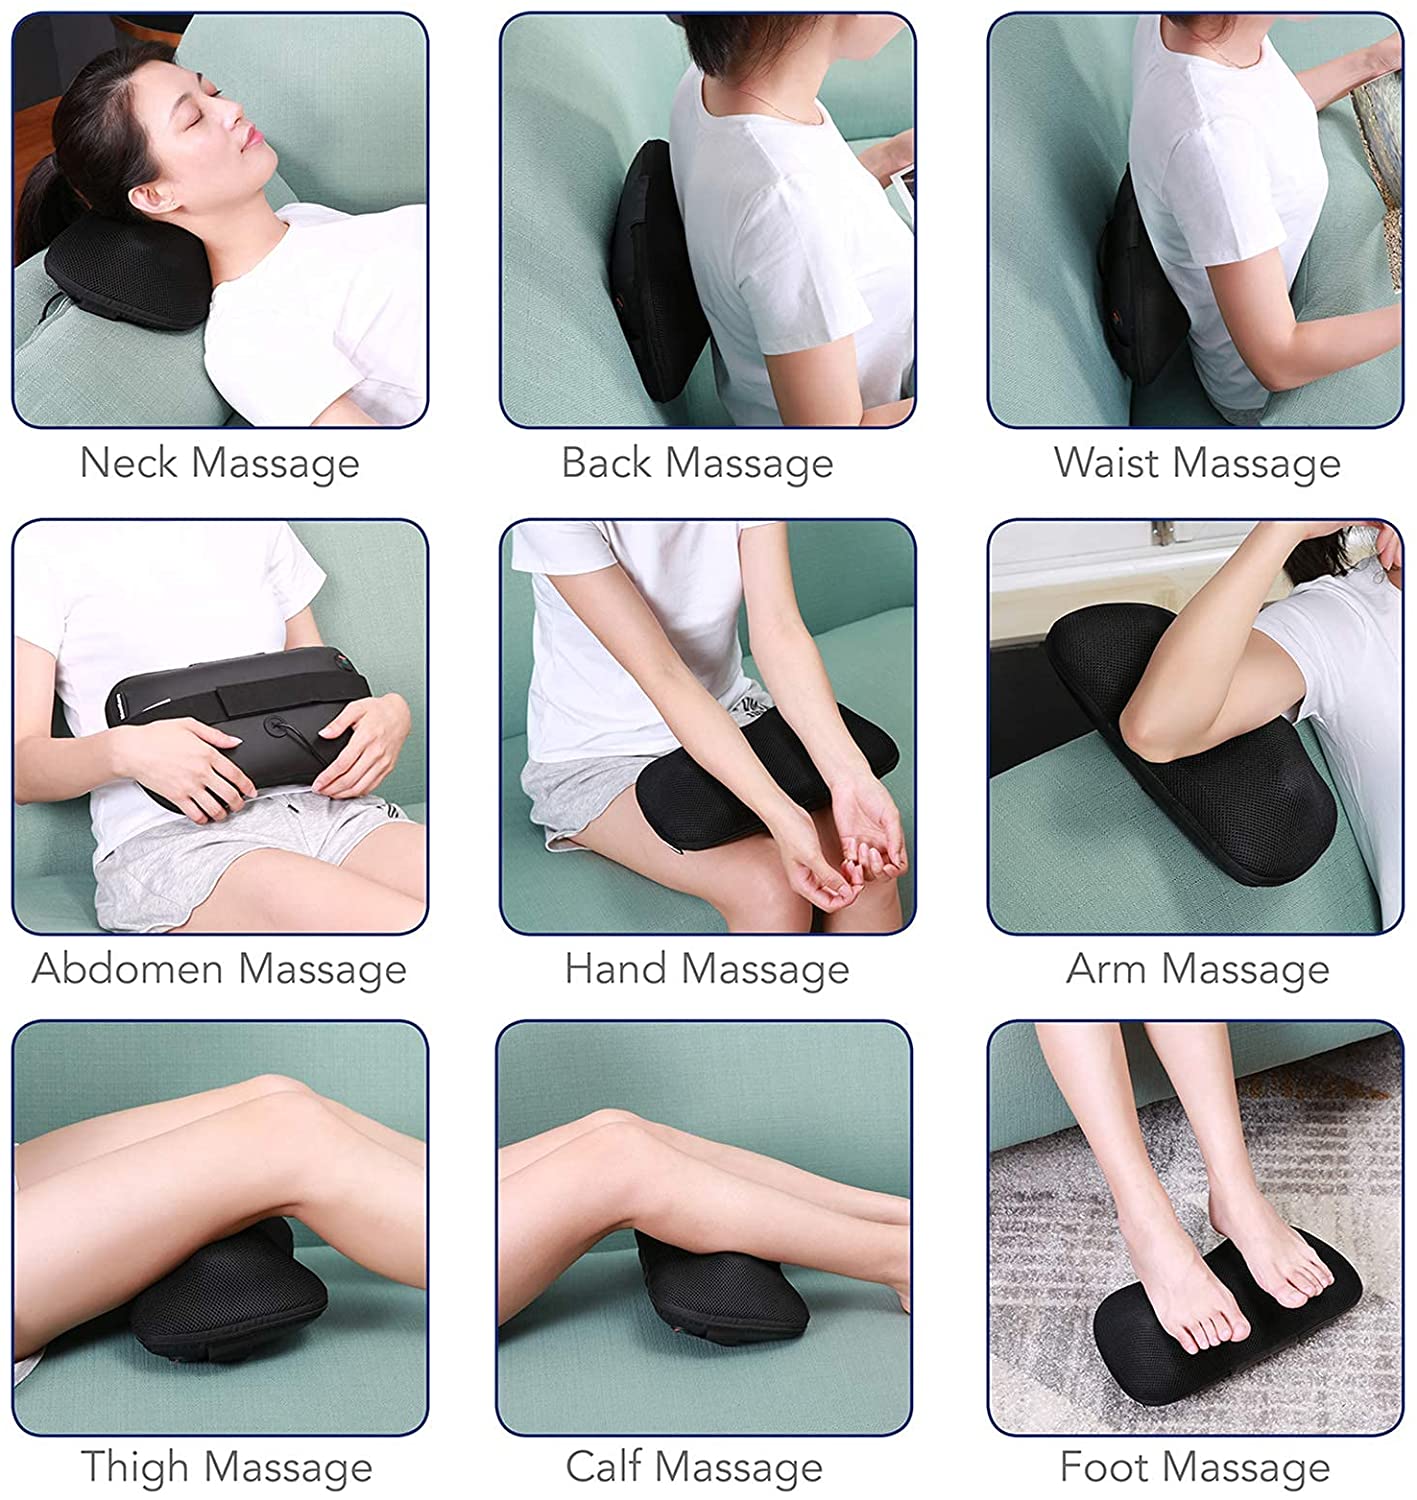 Heated Massage Pillow for Back - Electric Kneading Massage Pillow